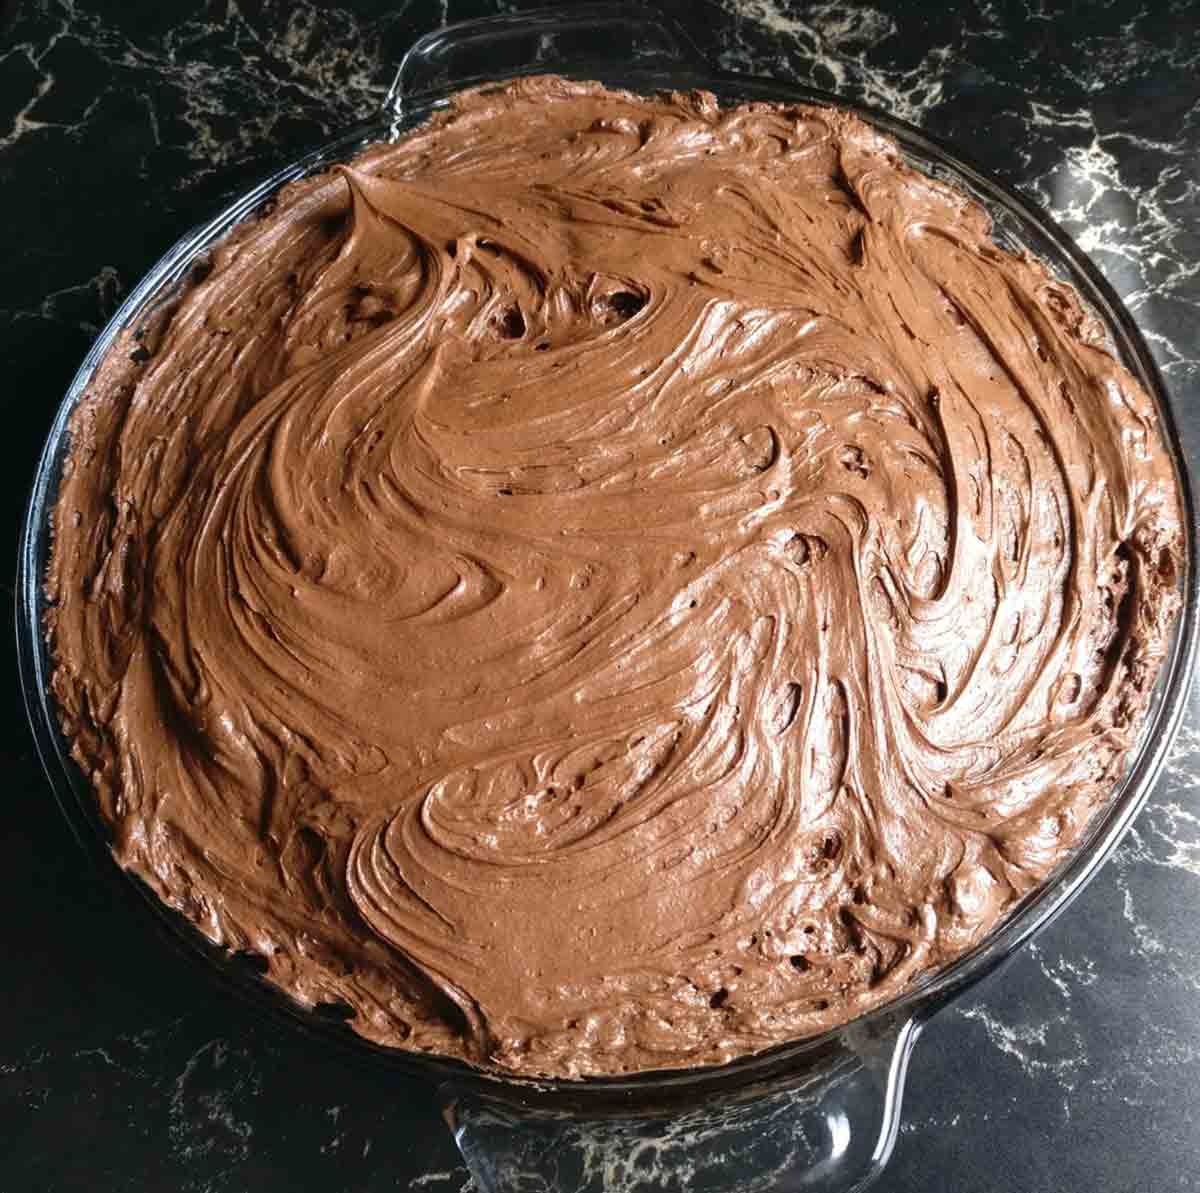 A chocolate wacky cake with chocolate frosting in a glass pie plate.